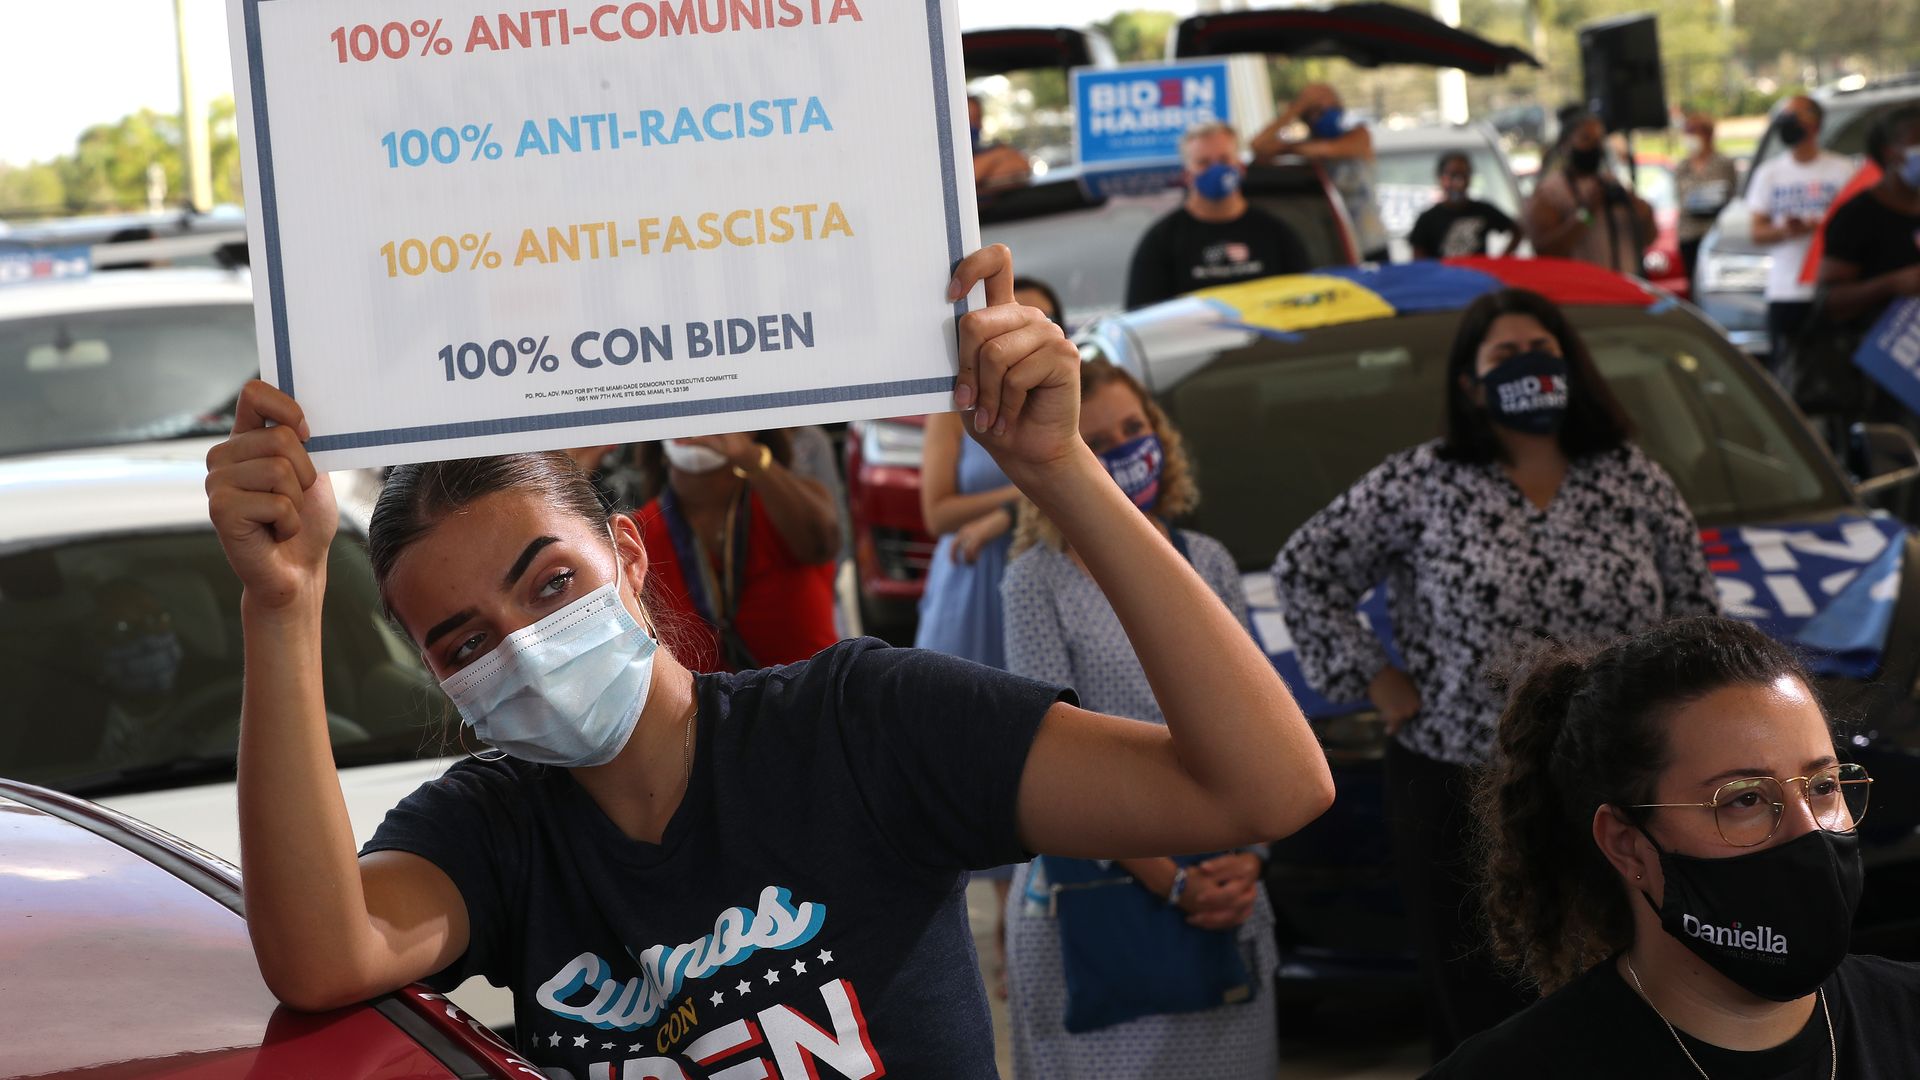 Photo of a Biden/Harris supporter holding up a sign in Spanish that urges people to vote for Biden